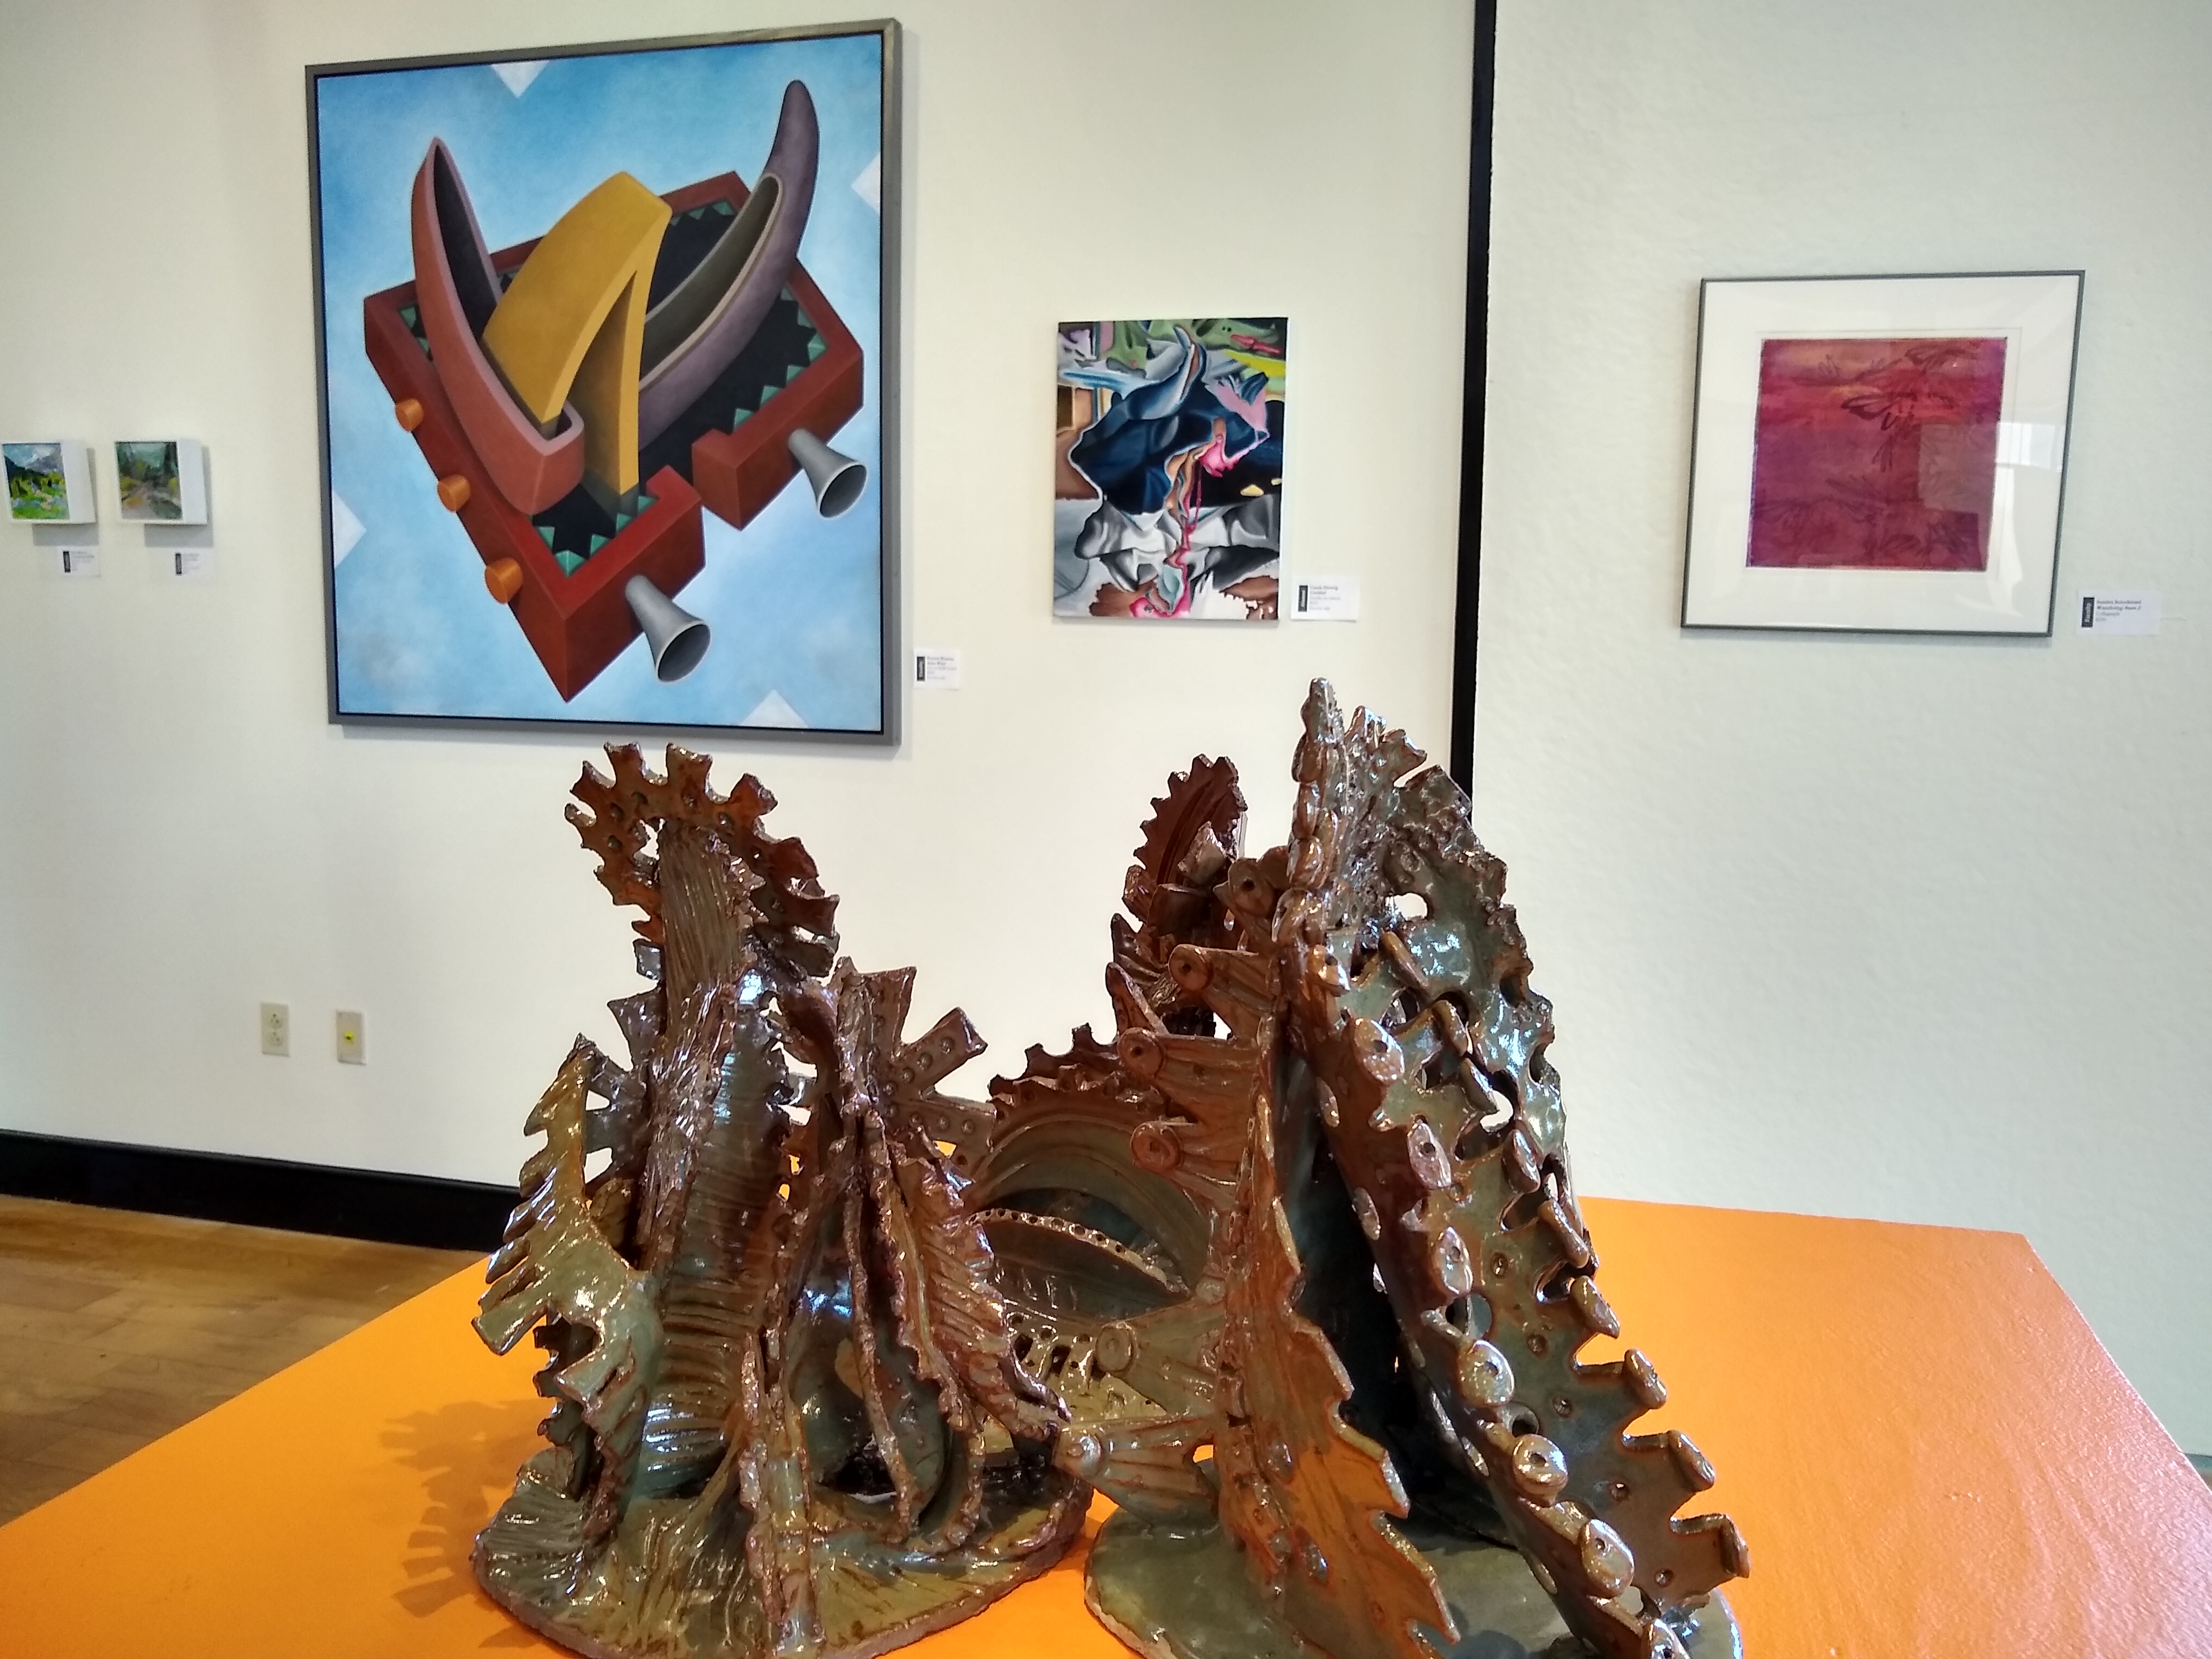 Artwork on display at the Blue Bell art gallery